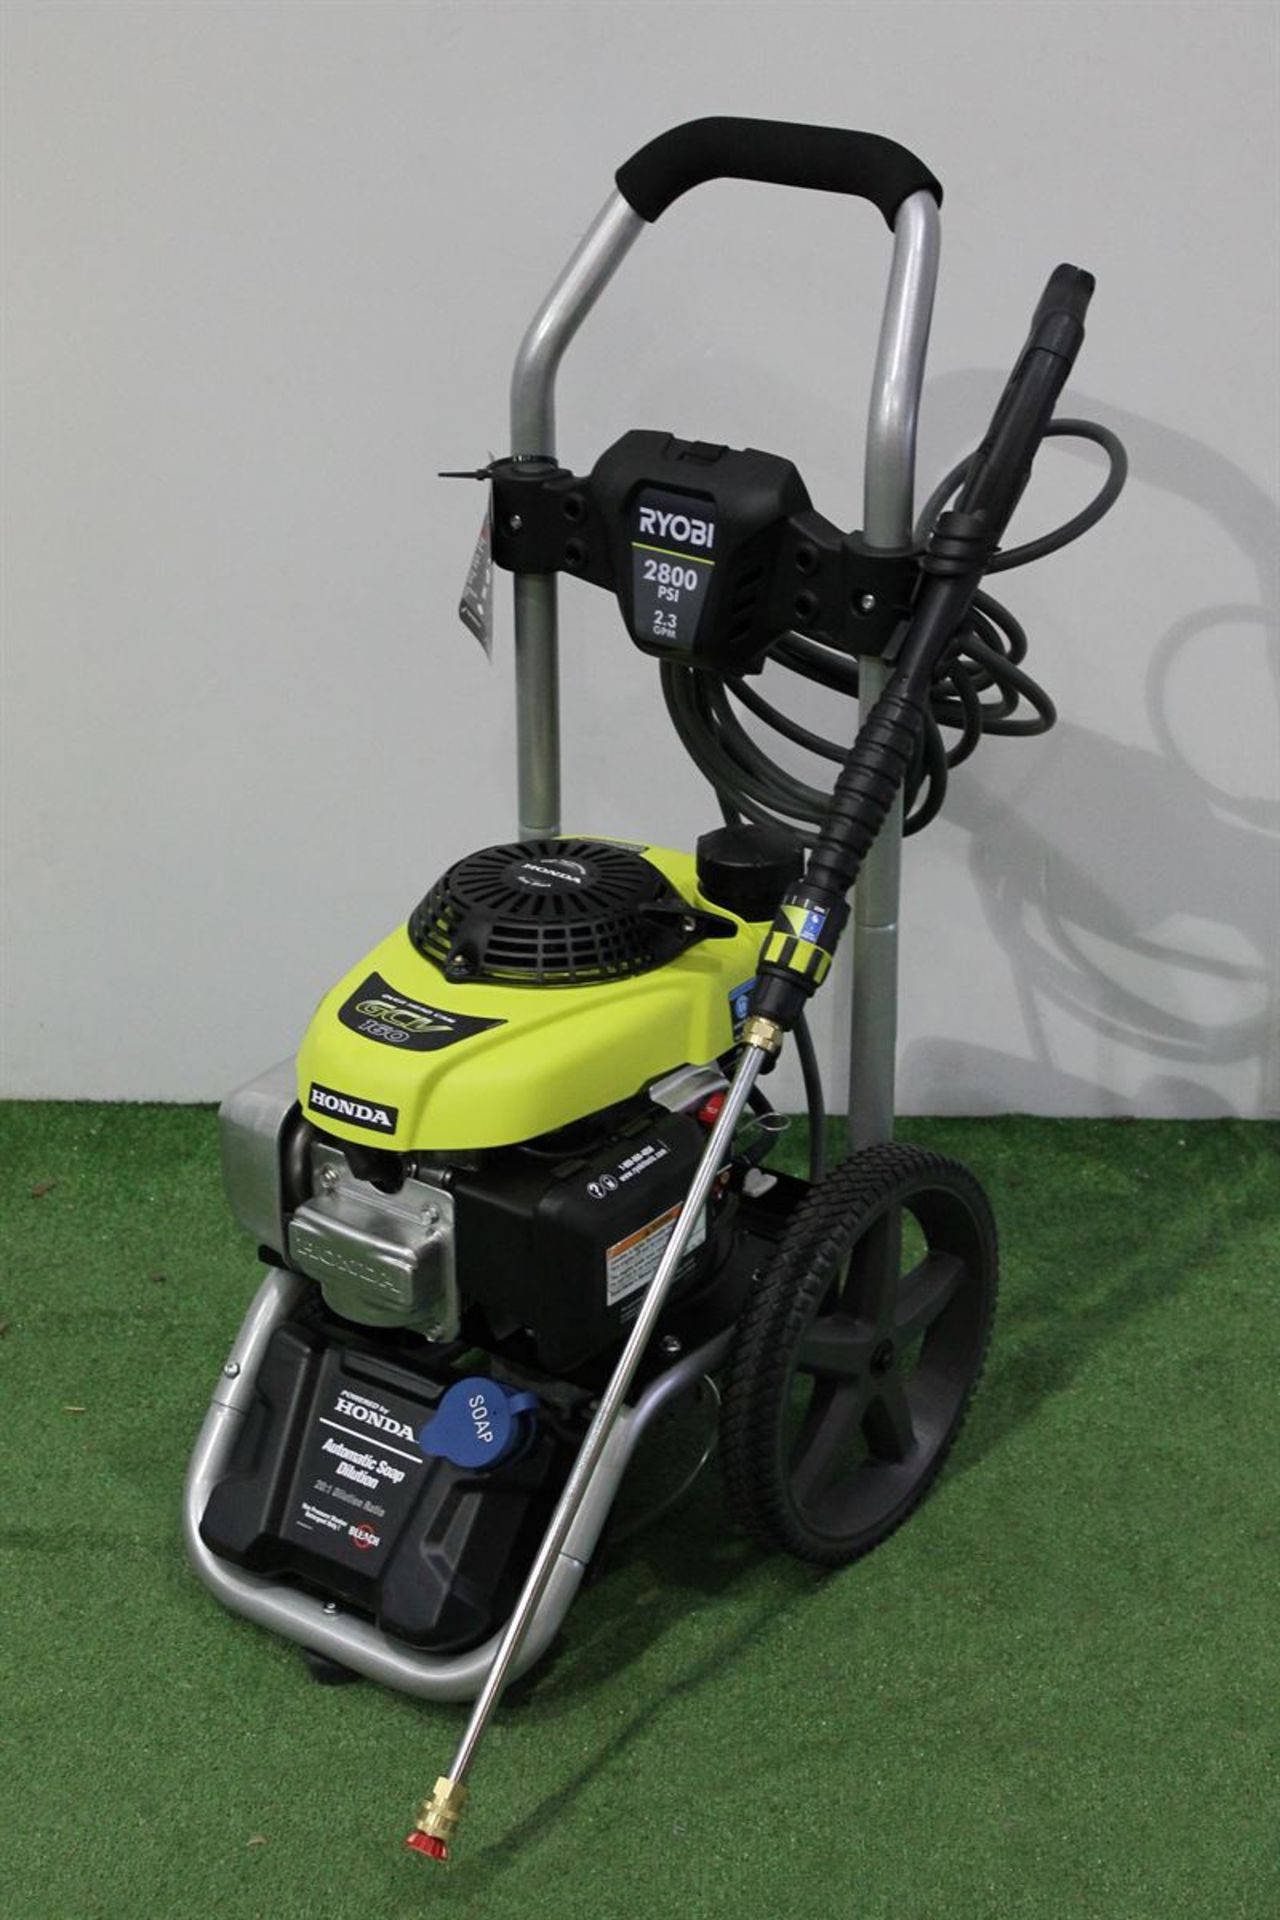 HONDA Engined 160cc 3000psi Pressure Washer With Built In Soap Dispenser